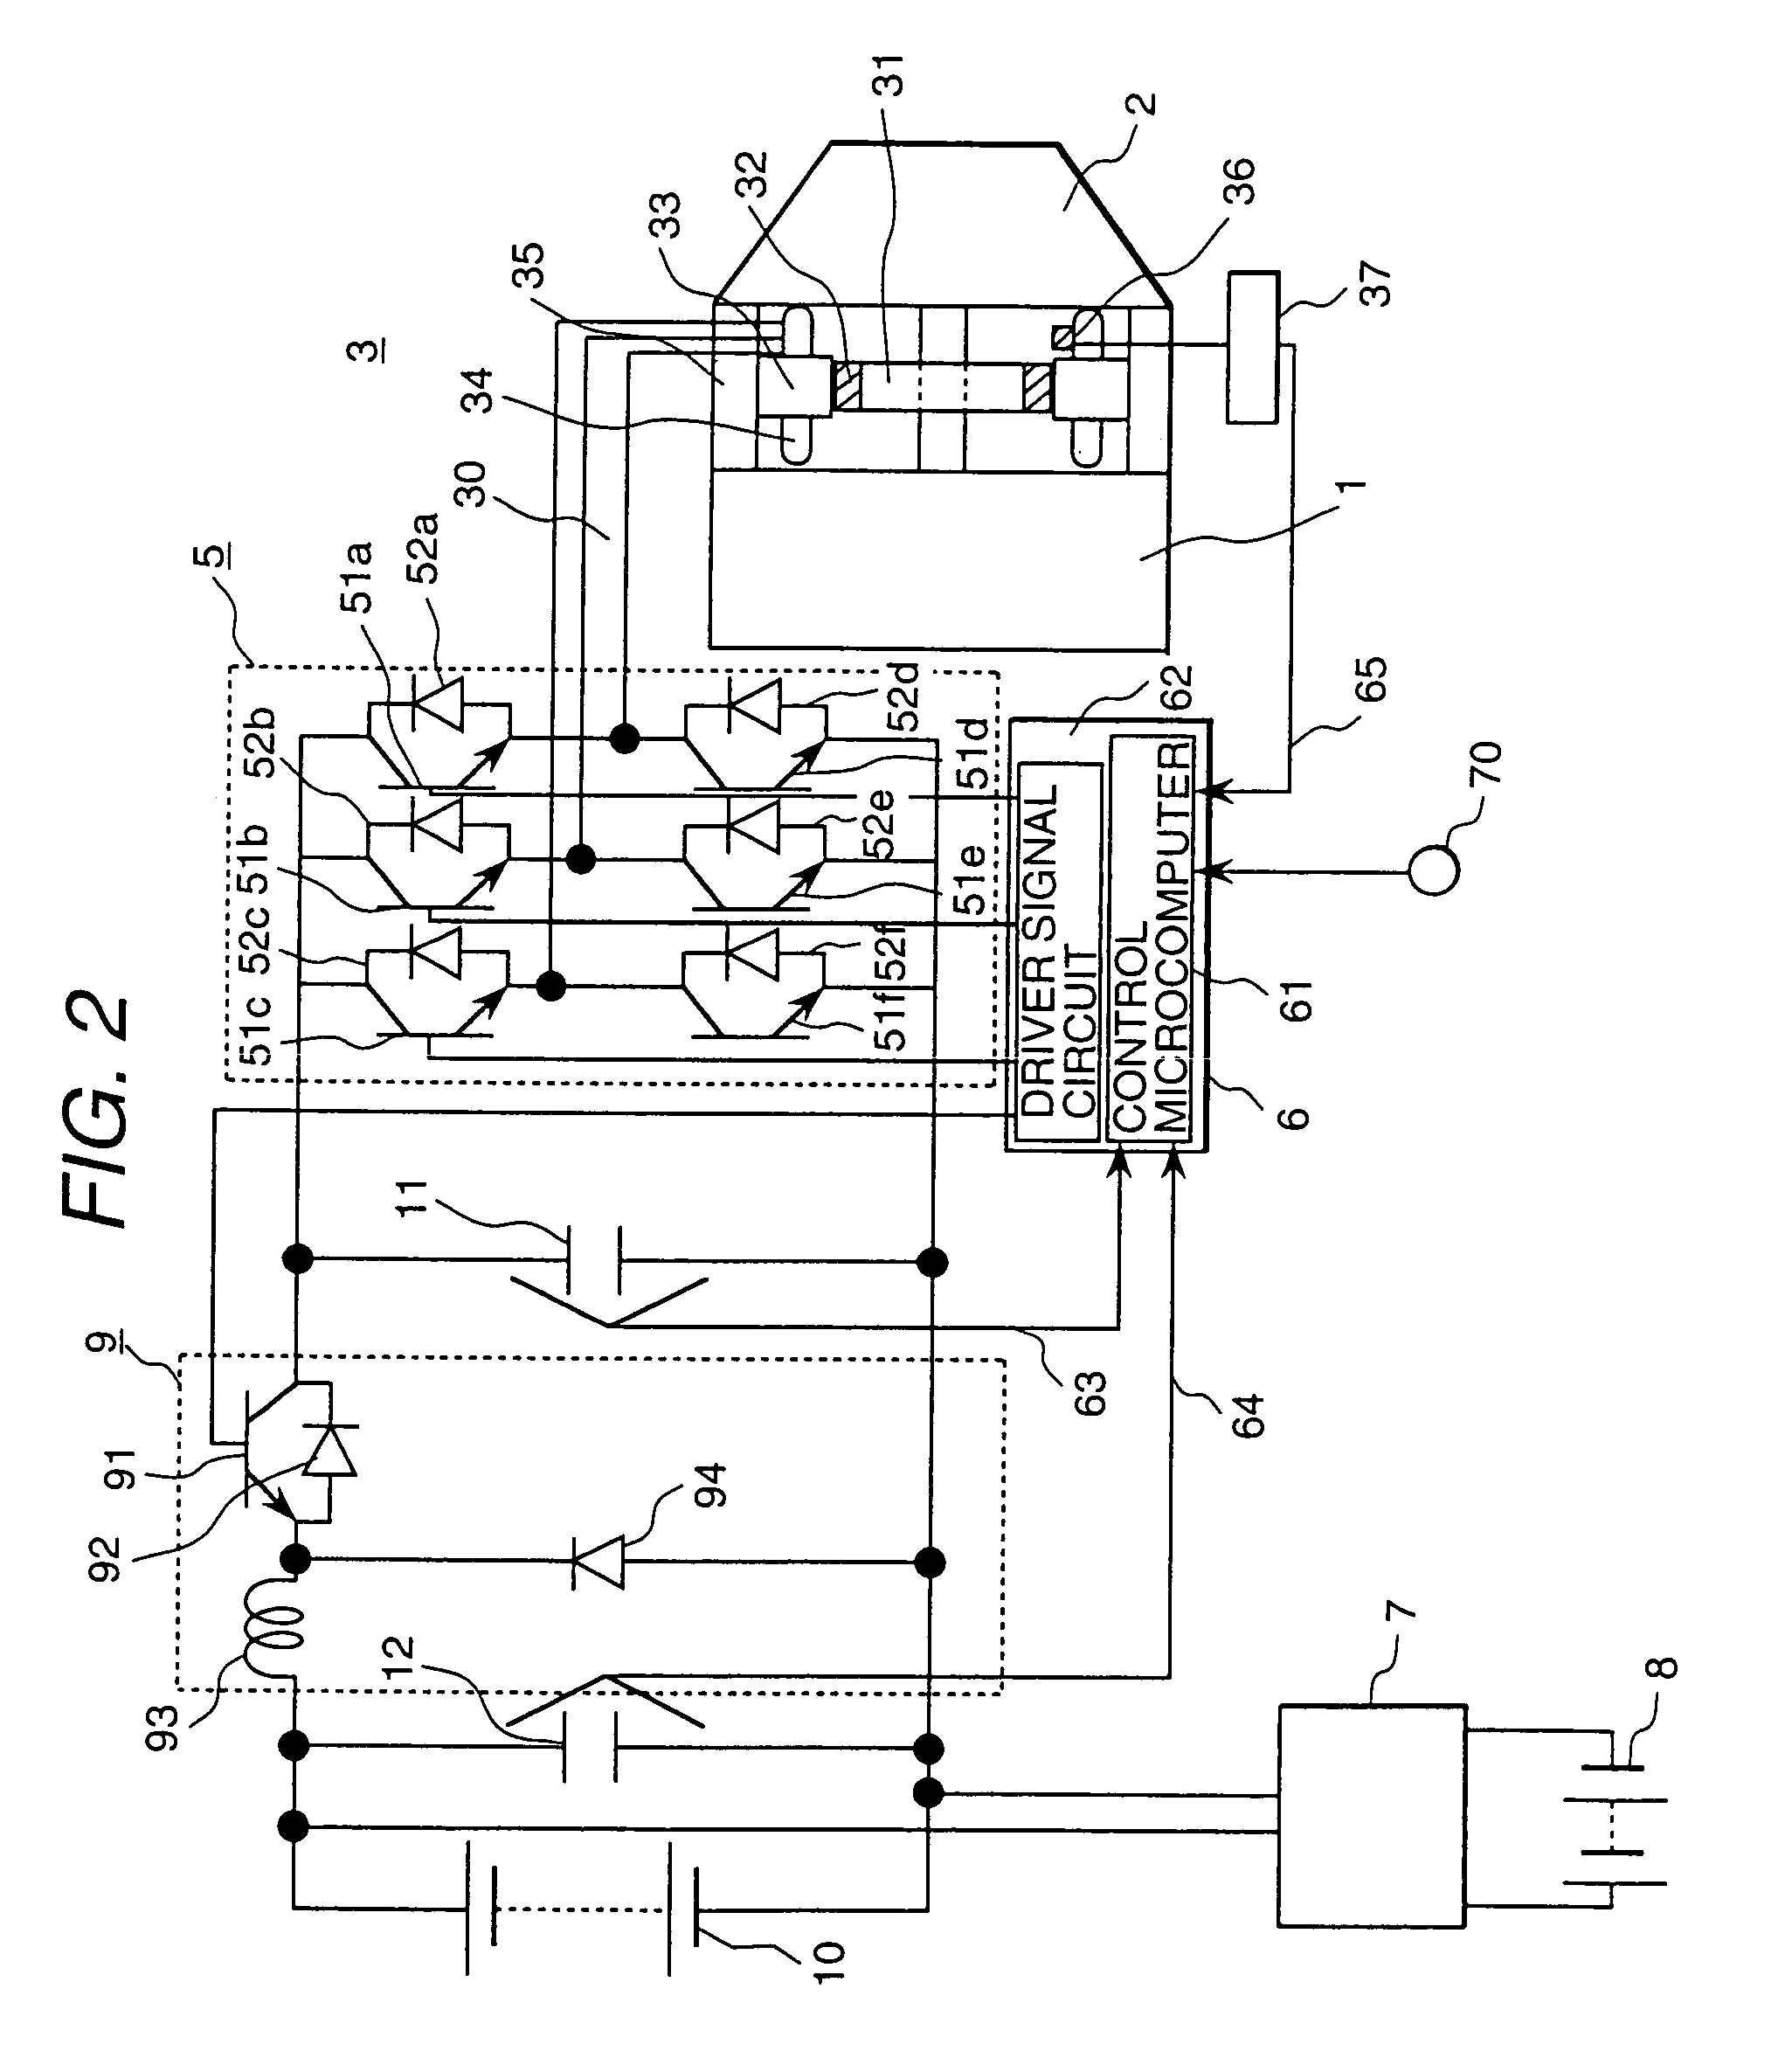 Dynamotor of hybrid vehicle, and method of control thereof